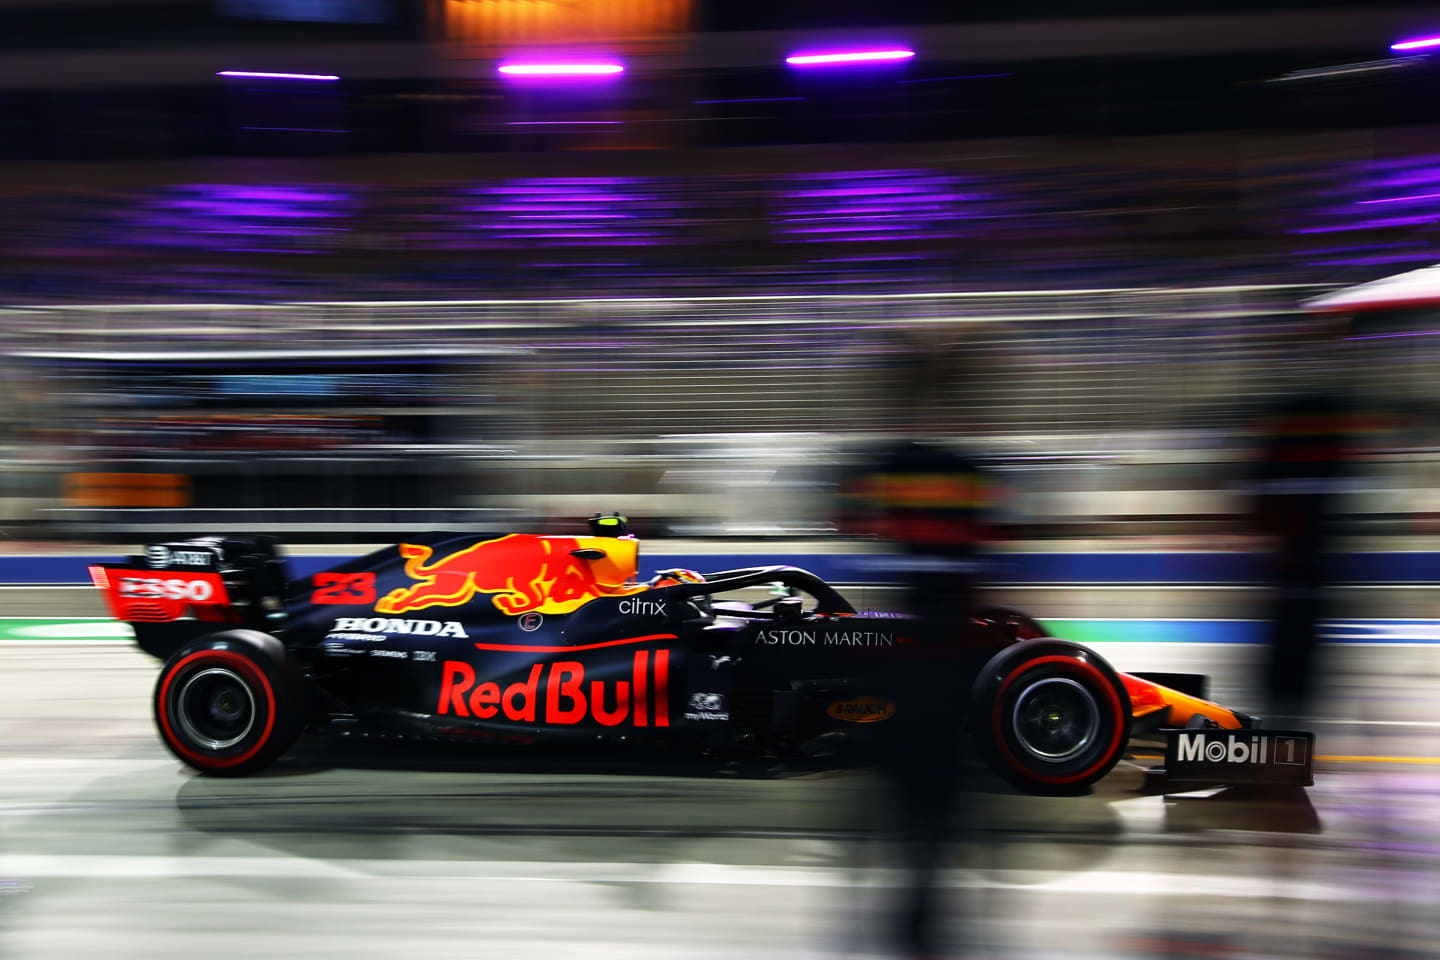 BAHRAIN, BAHRAIN - DECEMBER 04: Alexander Albon of Thailand driving the (23) Aston Martin Red Bull Racing RB16 stops in the Pitlane during practice ahead of the F1 Grand Prix of Sakhir at Bahrain International Circuit on December 04, 2020 in Bahrain, Bahrain. (Photo by Mark Thompson/Getty Images)